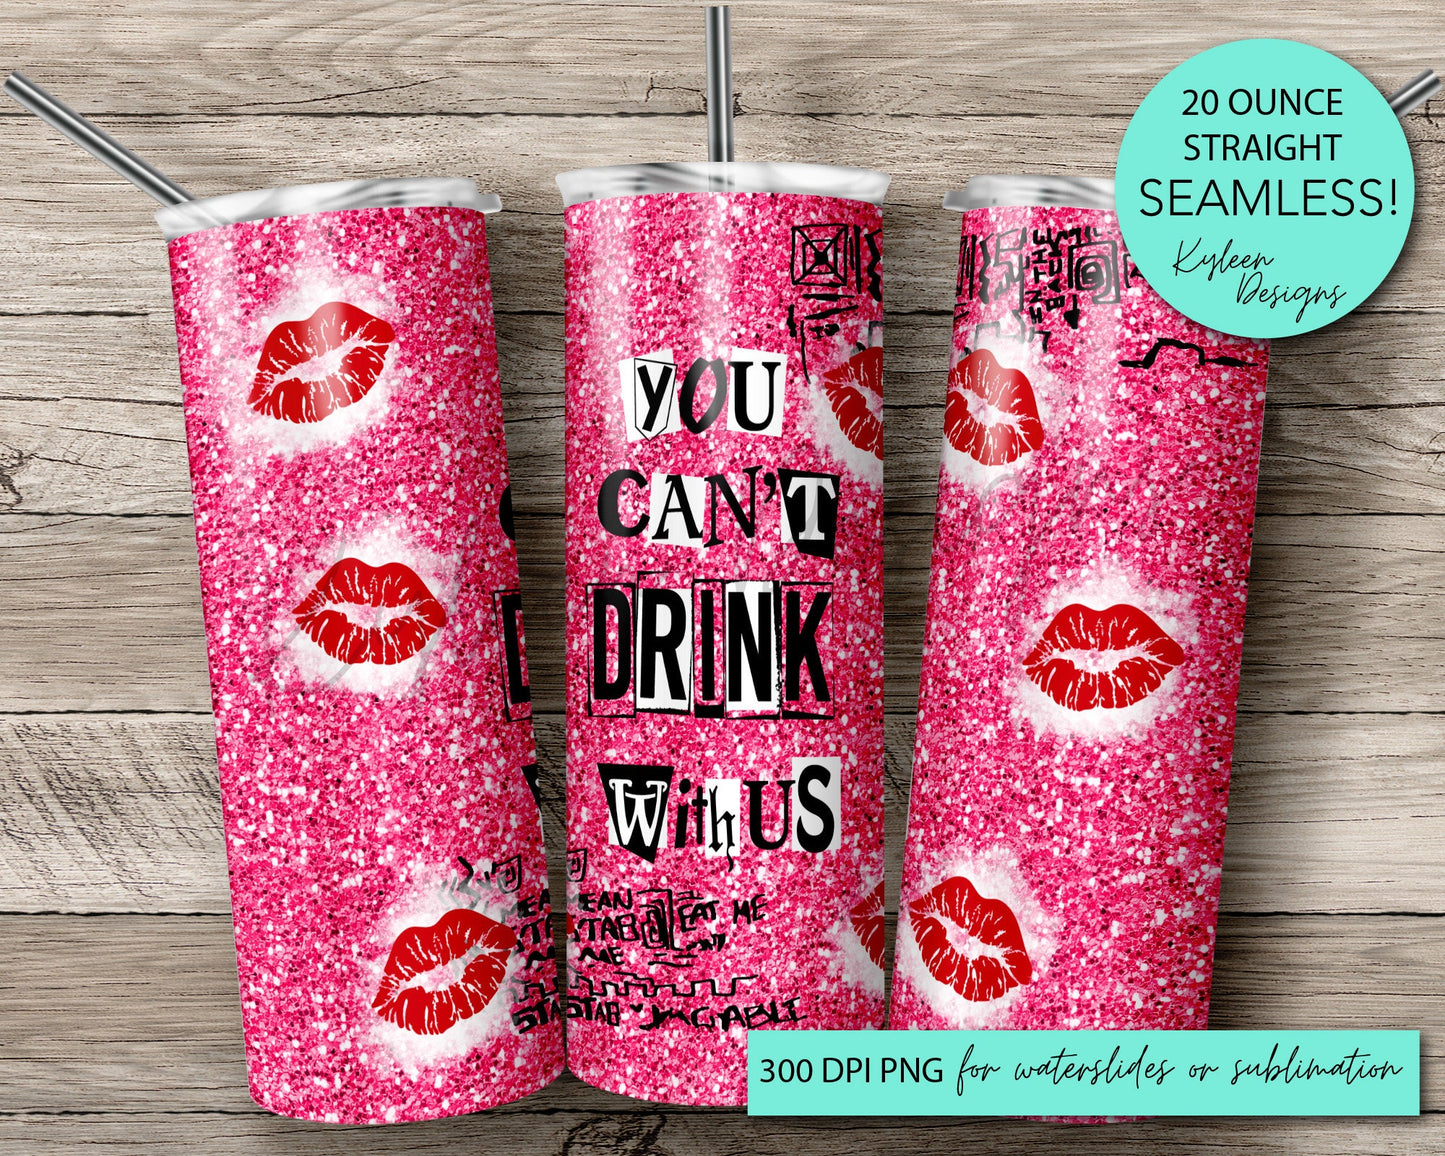 SEAMLESS you can't drink with us 20 ounce tumbler wrap for sublimation, waterslide High res PNG digital file- Straight only